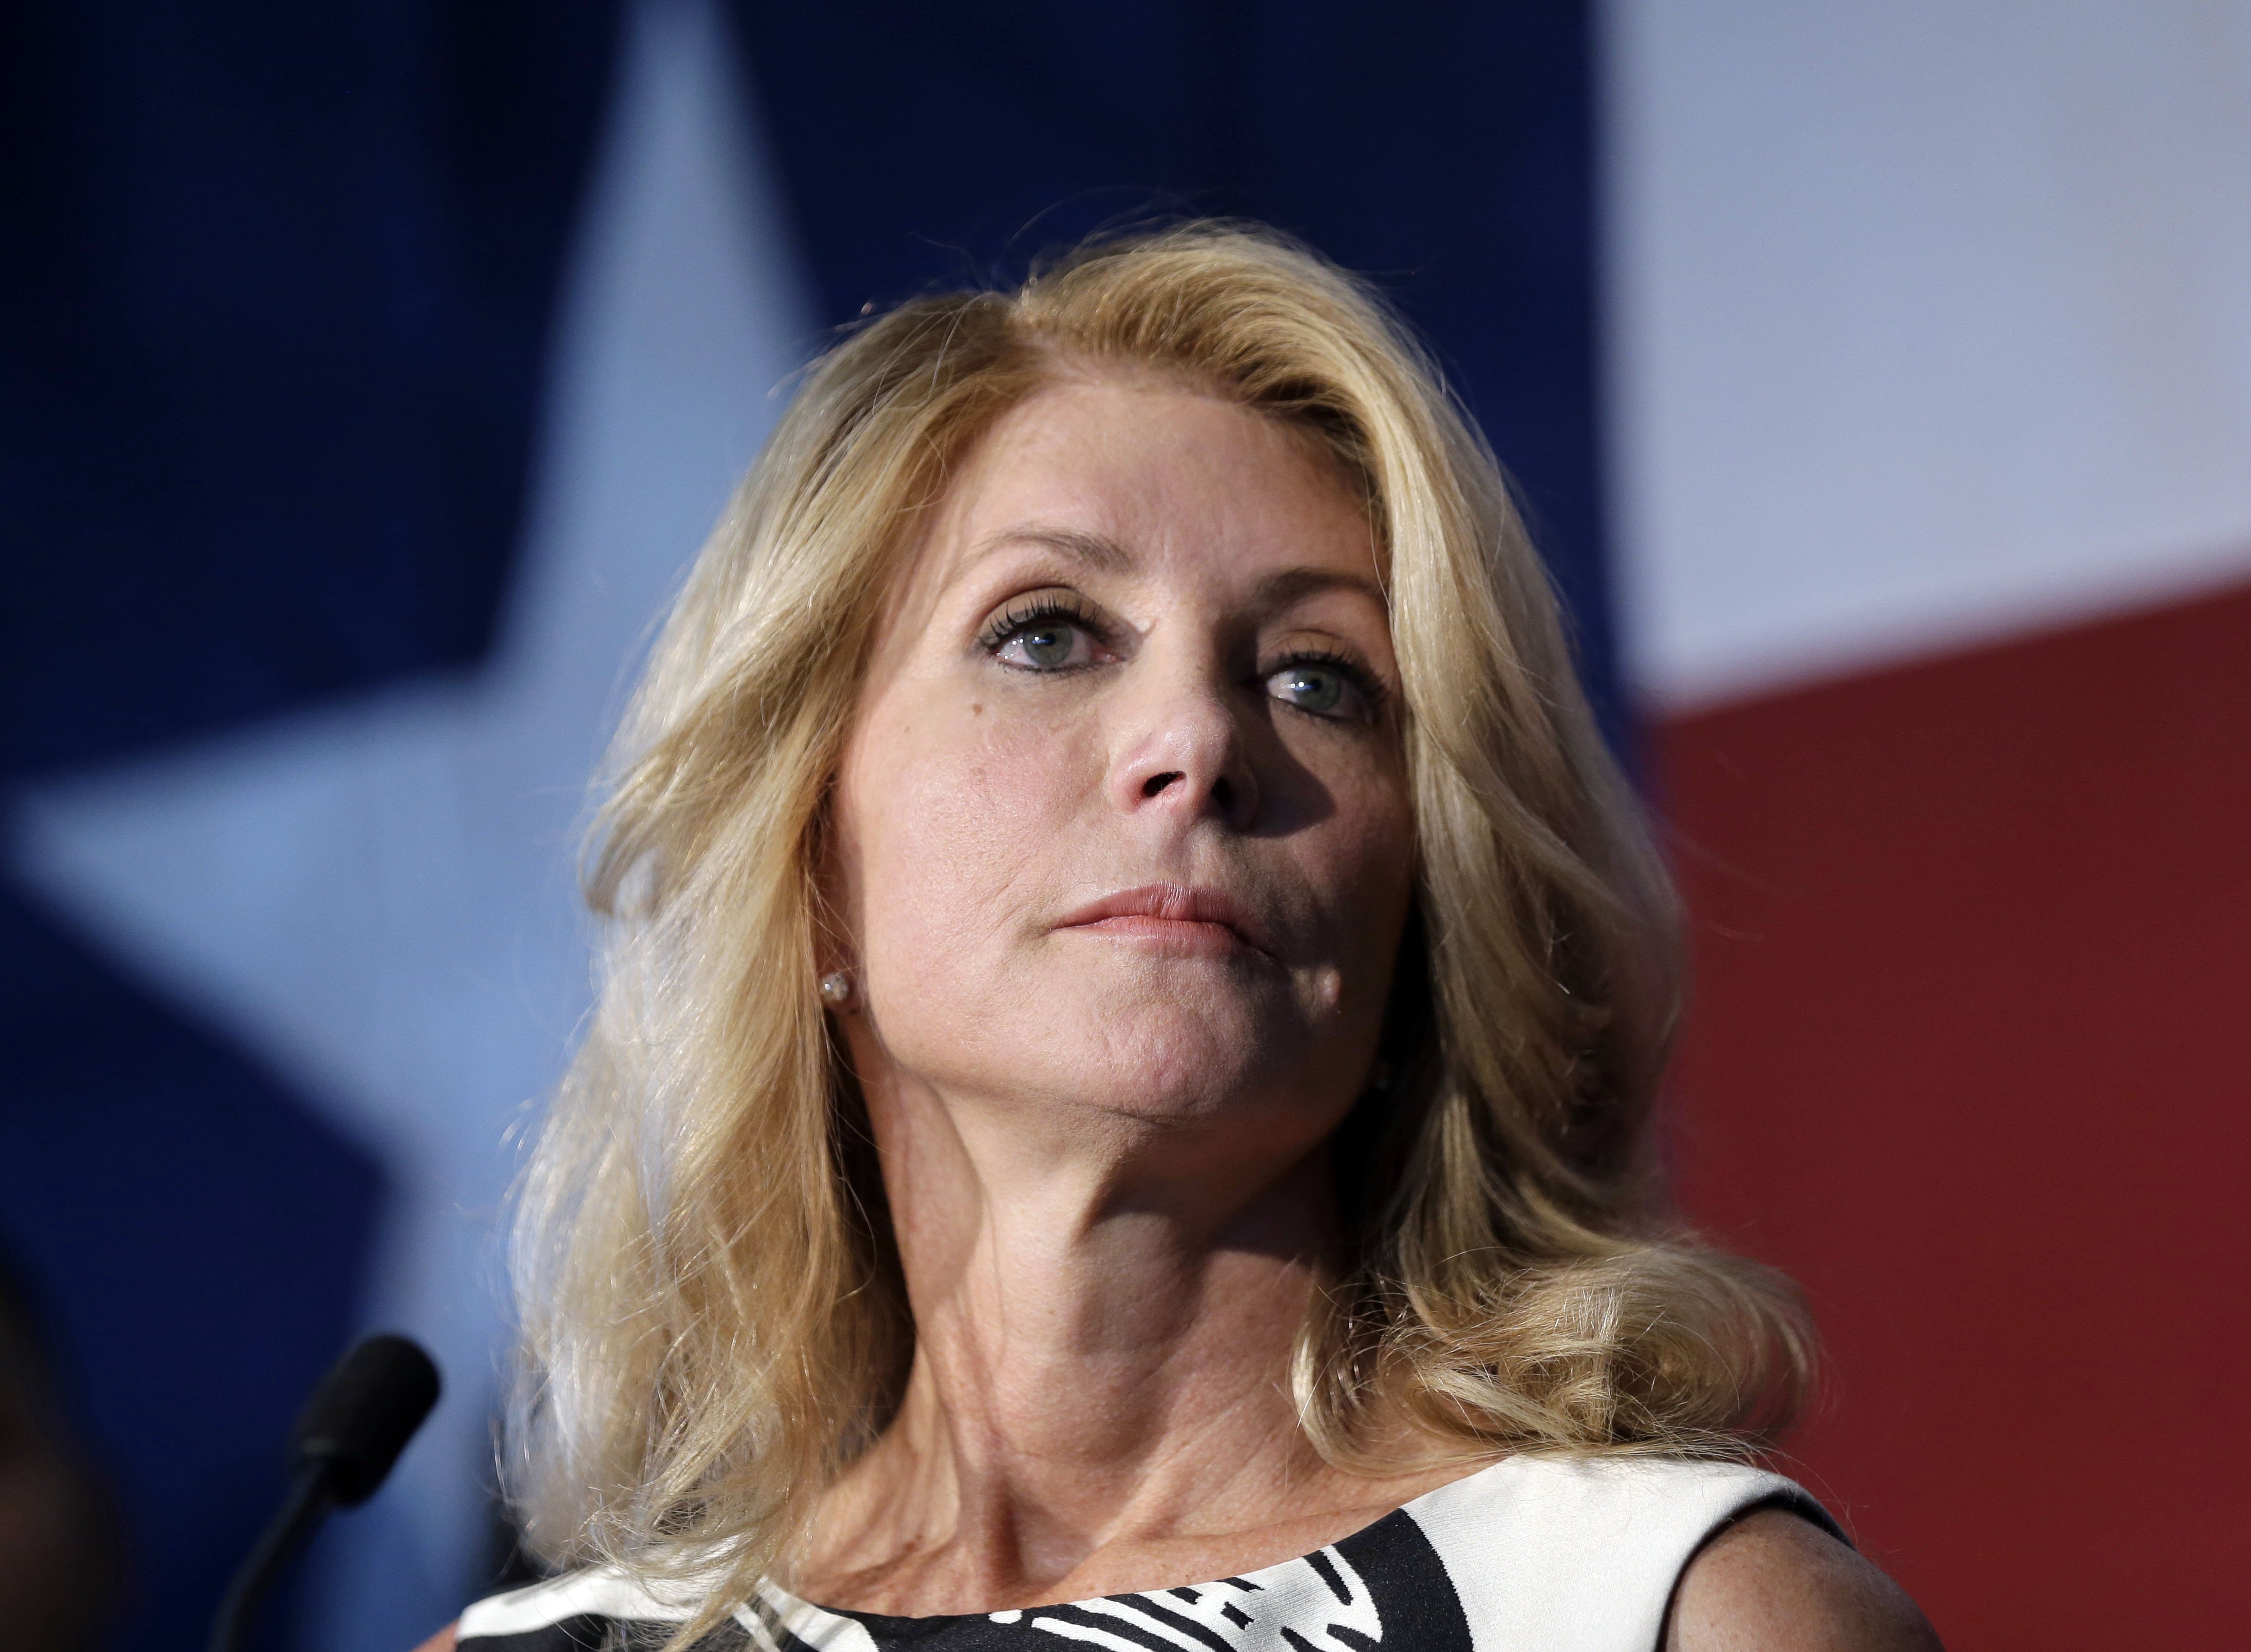 Texas Democratic gubernatorial candidate Wendy Davis presents her new education policy during a stop at Palo Alto College in San Antonio on Aug. 26, 2014 (Eric Gay—AP)